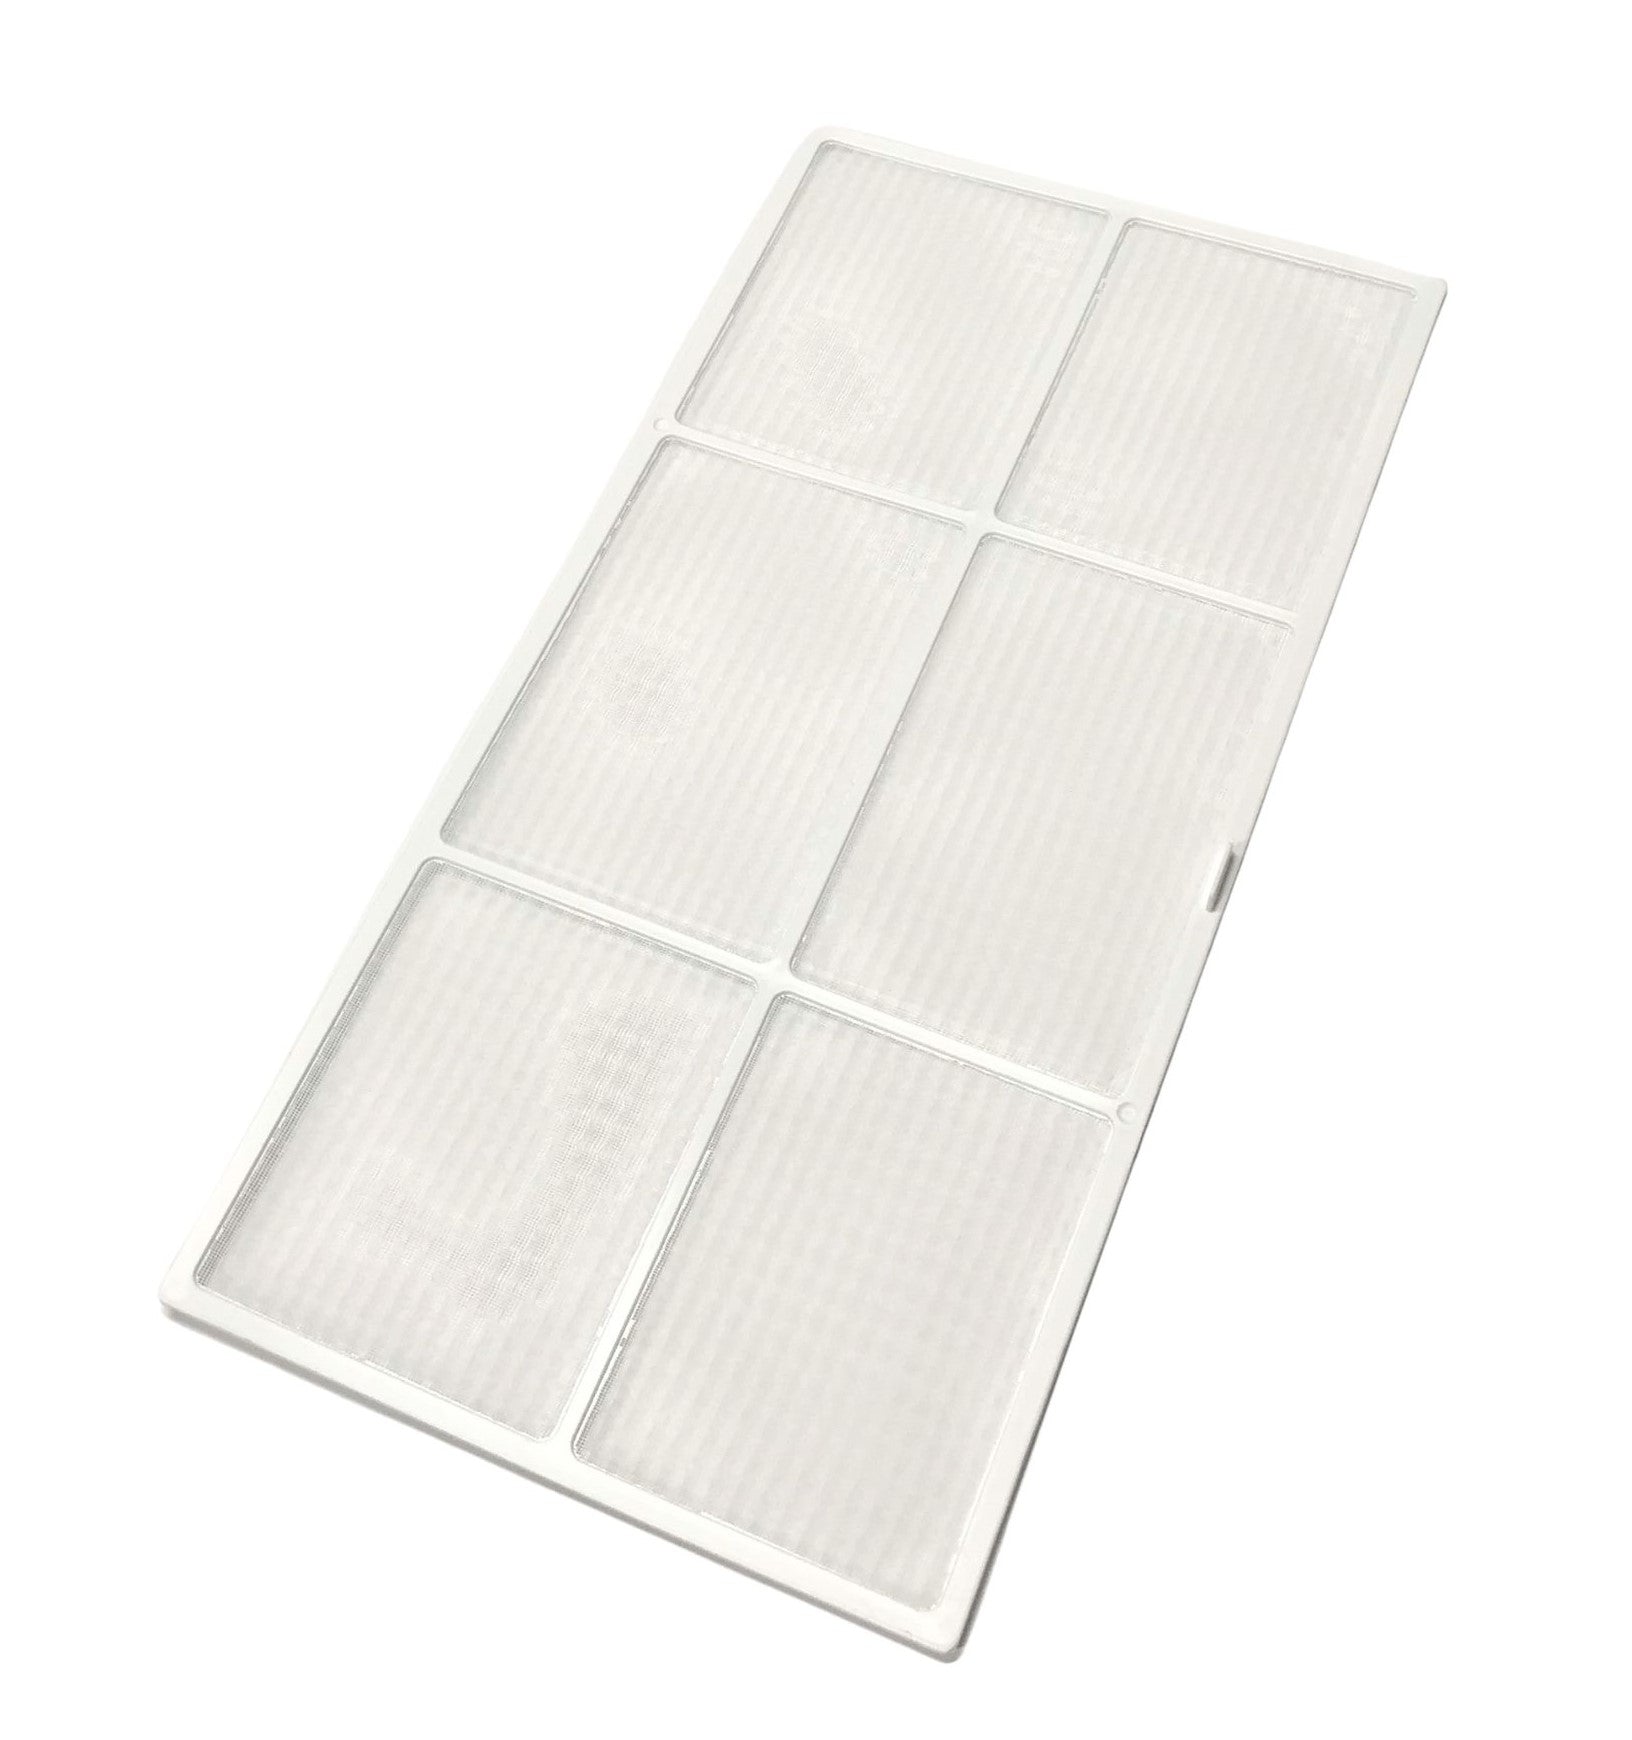 Genuine OEM GE Air Conditioner AC Filter Originally Shipped With AEW10AYL1, AEW12AYL1